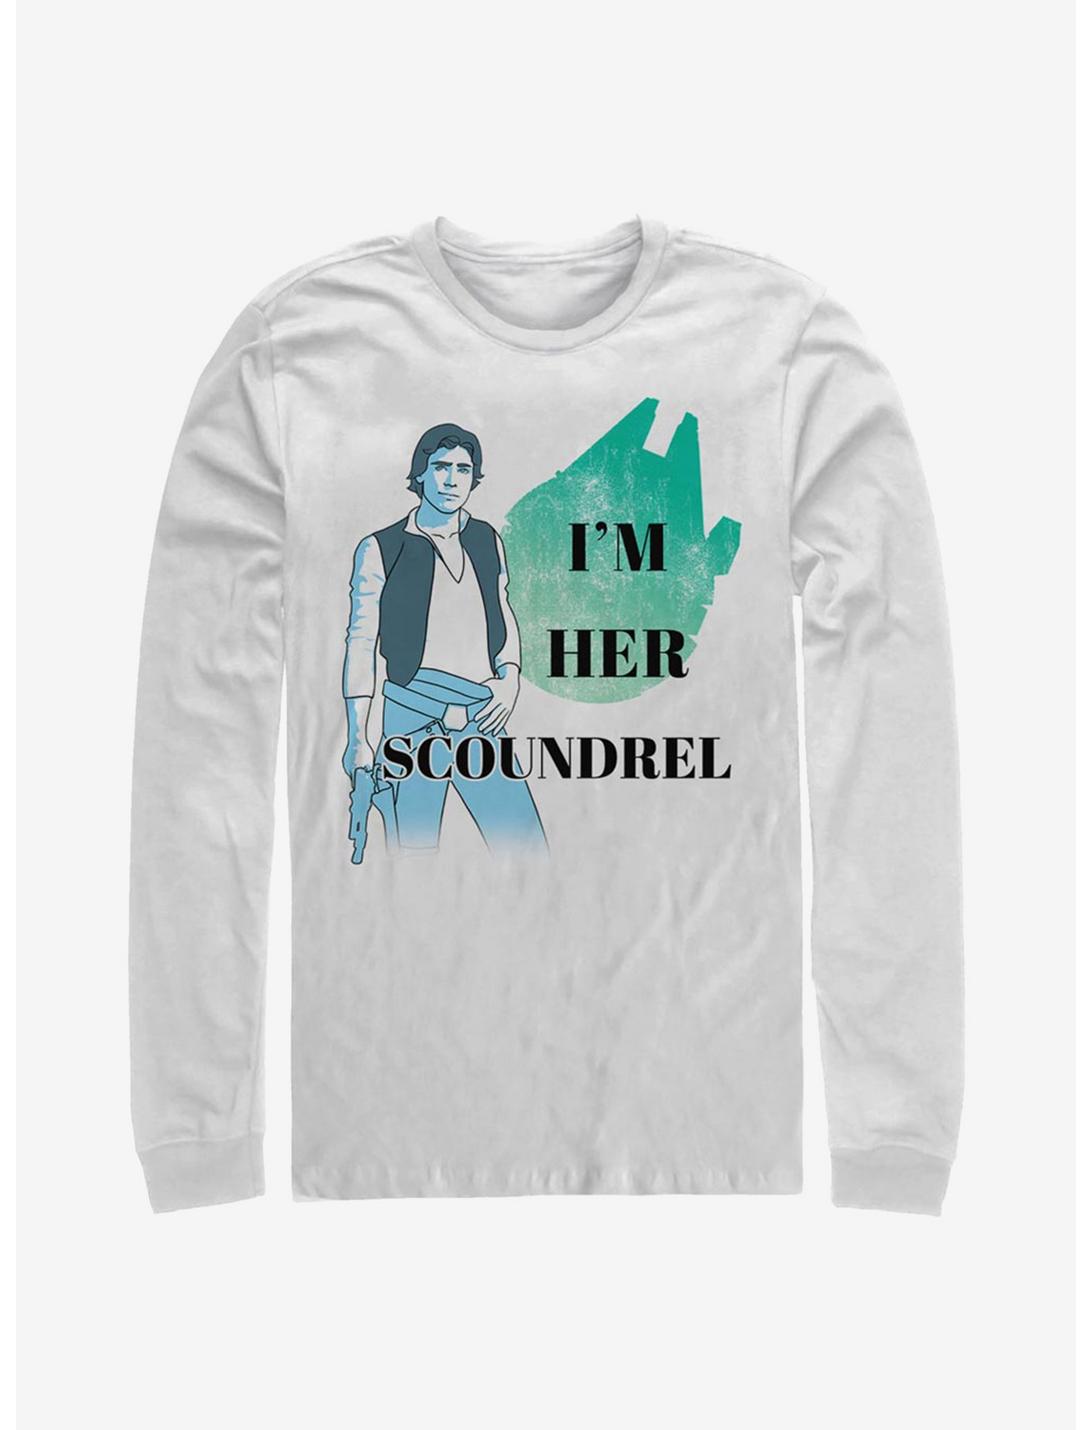 Star Wars Han Solo Her Scoundrel Long-Sleeve T-Shirt, WHITE, hi-res